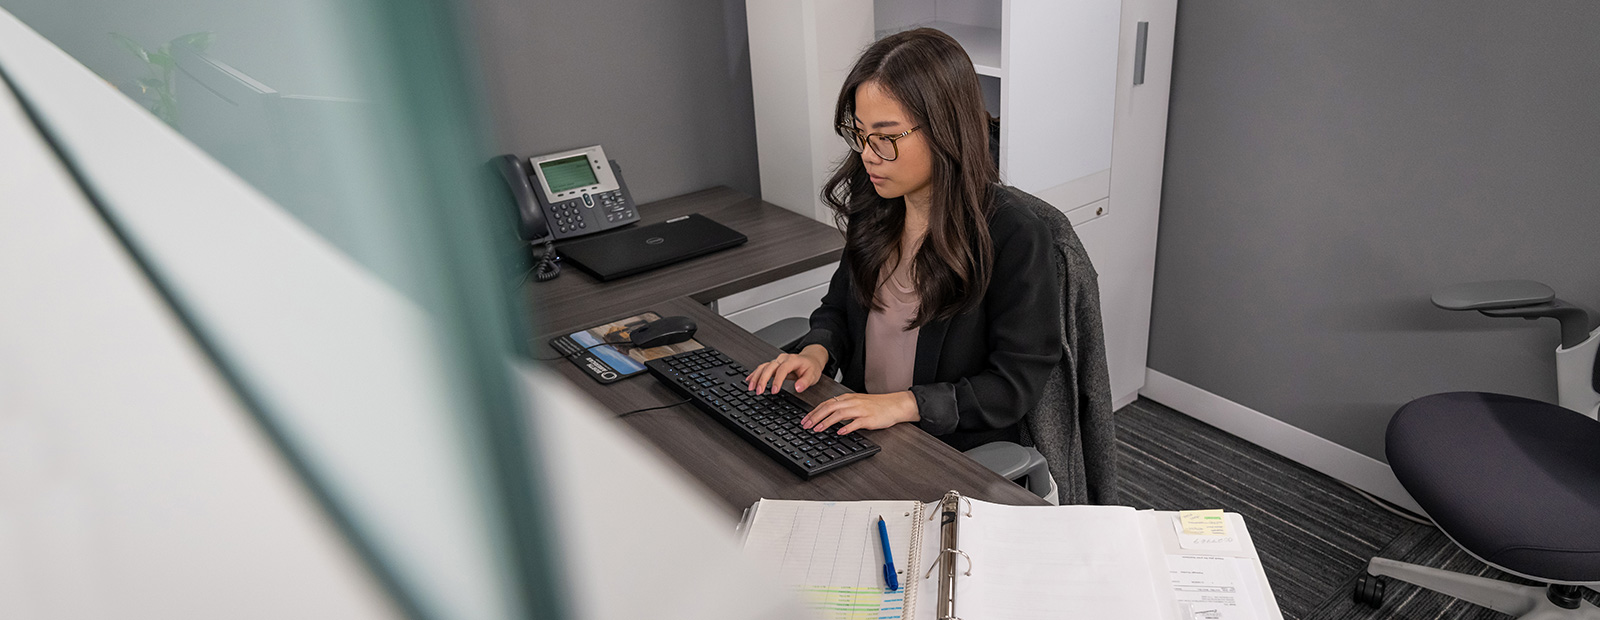 young woman working in office at computer